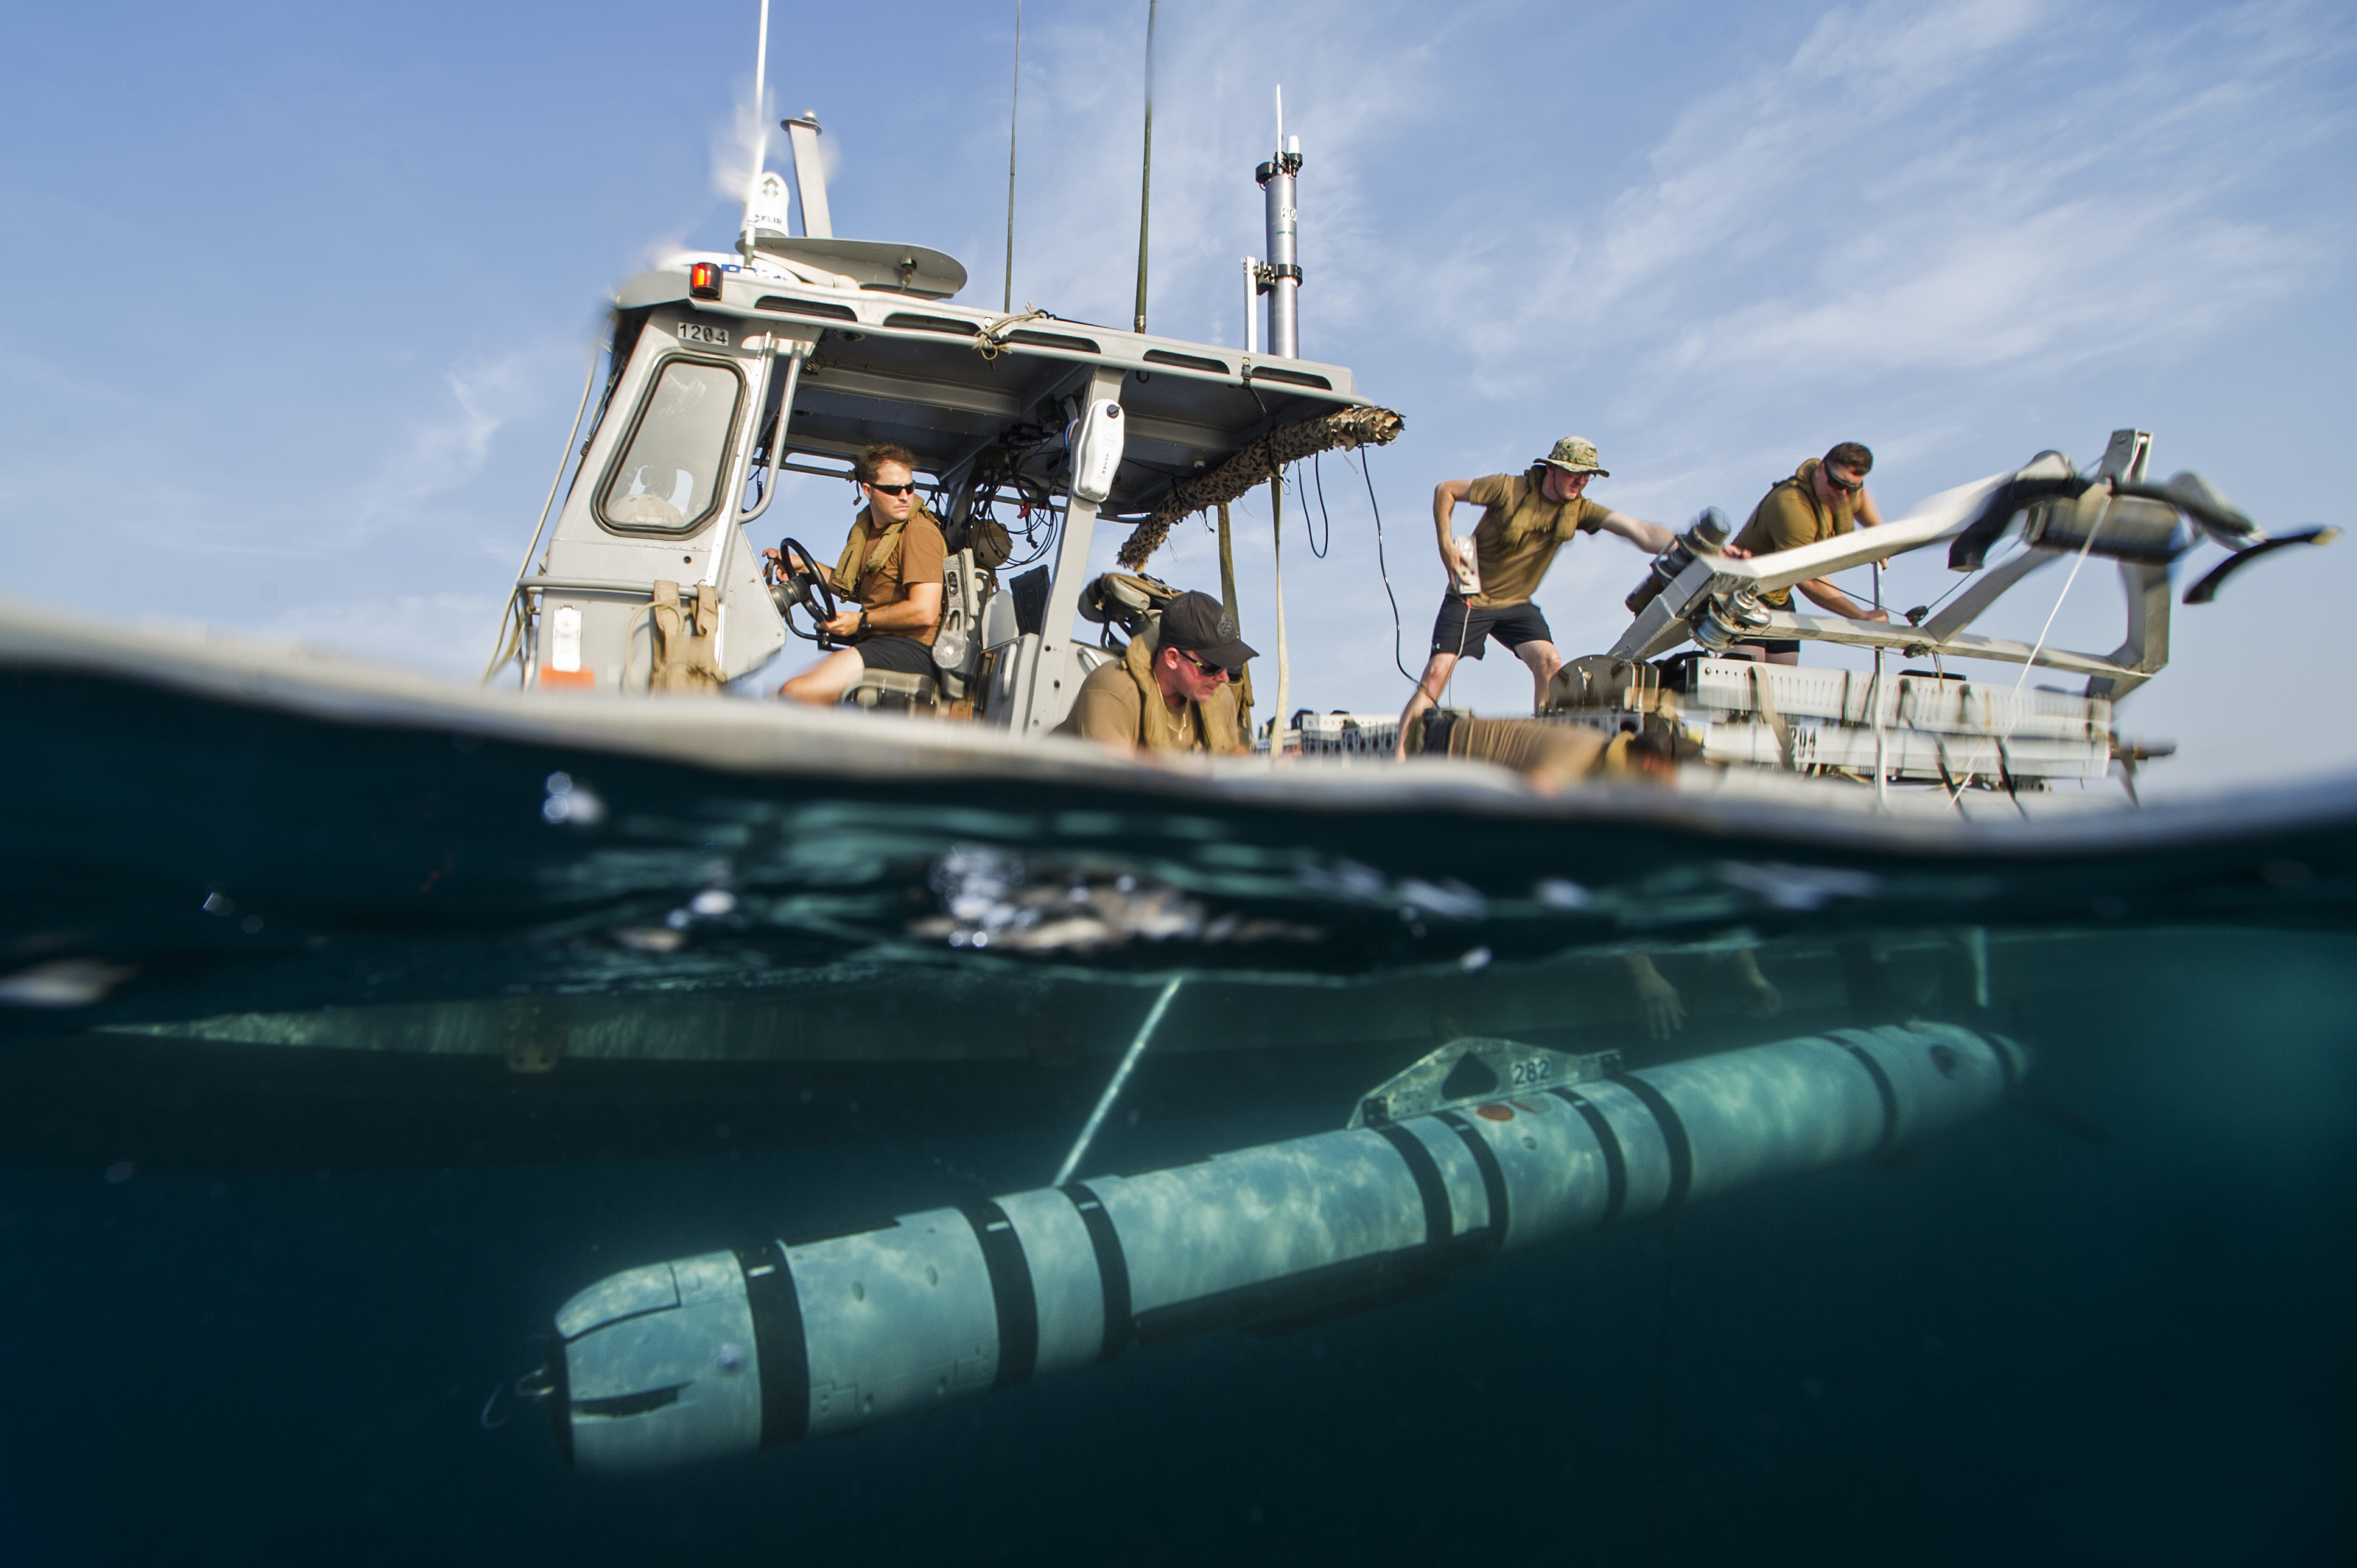 Crew members from Task Group 56.1 launch a MK 18 MOD 2 unmanned underwater vehicle from a rigid-hull inflatable boat during Squadex 2016, on Aug. 2, 2016, in the Persian Gulf. Squadex 2016 demonstrates U.S./U.K. mine detection capabilities in the U.S. 5th Fleet area of operations. US Navy photo.